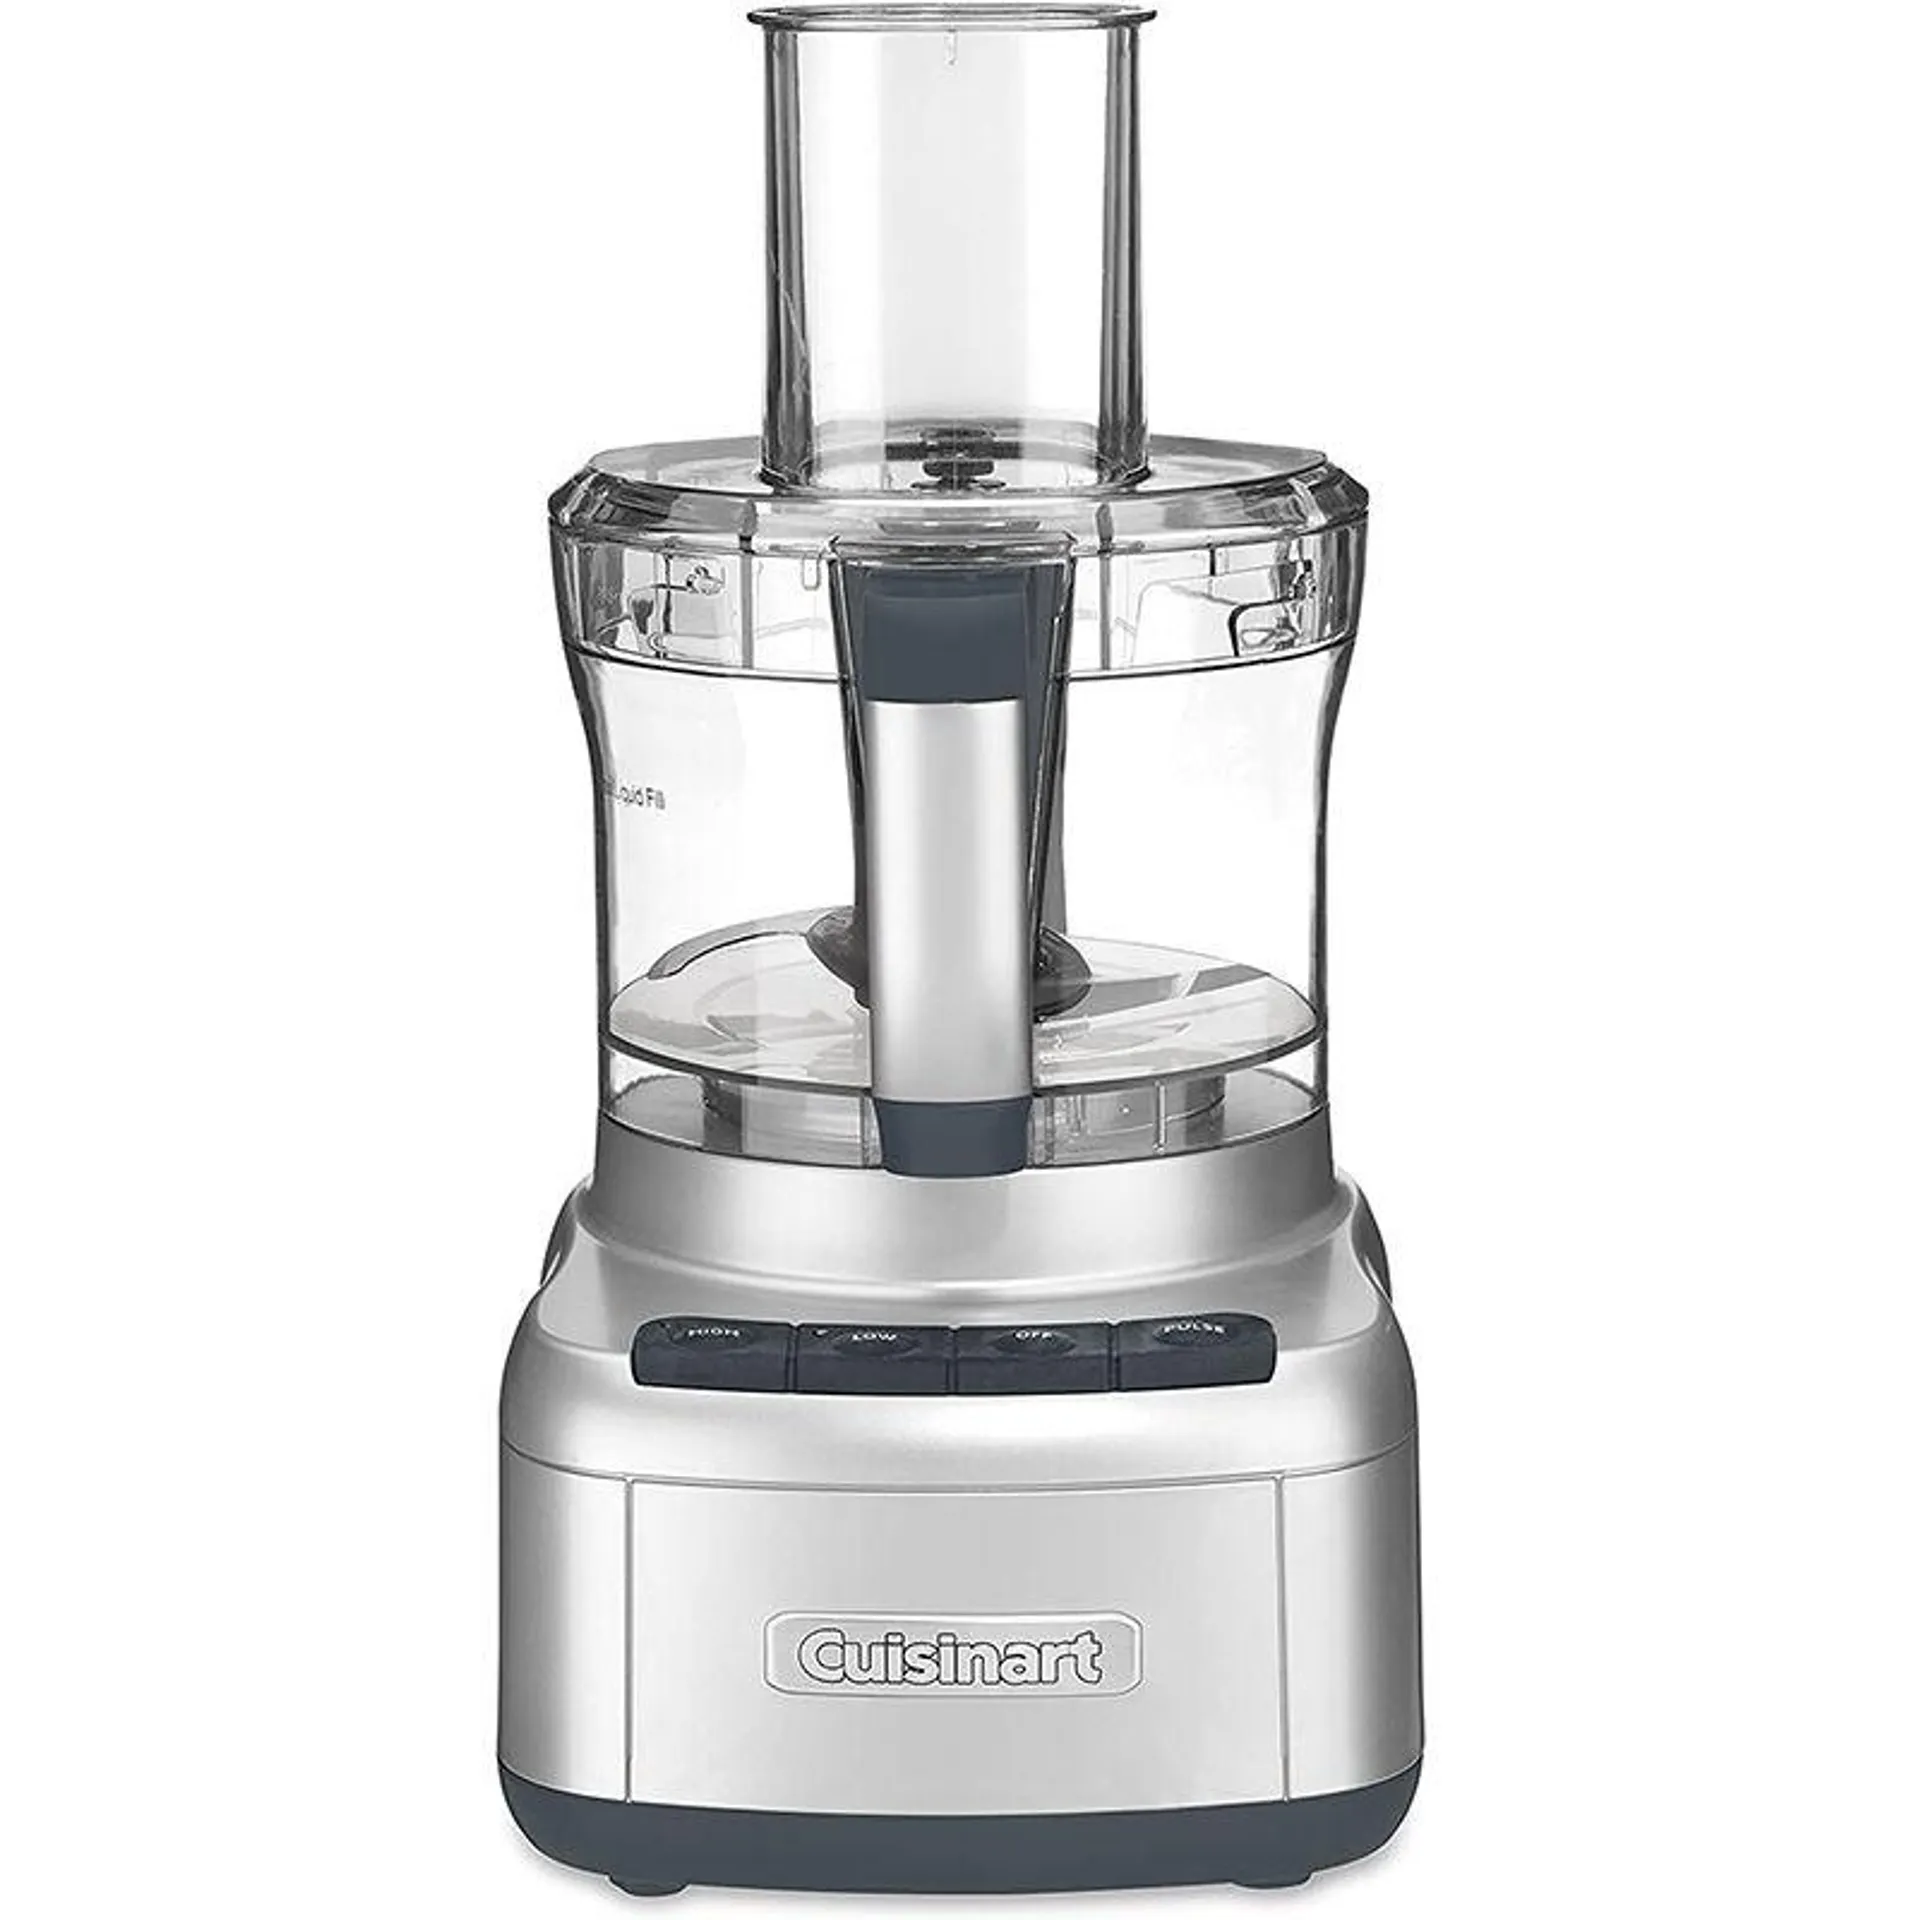 Cuisinart Elemental 8 Cup Food Processor - Stainless Steel